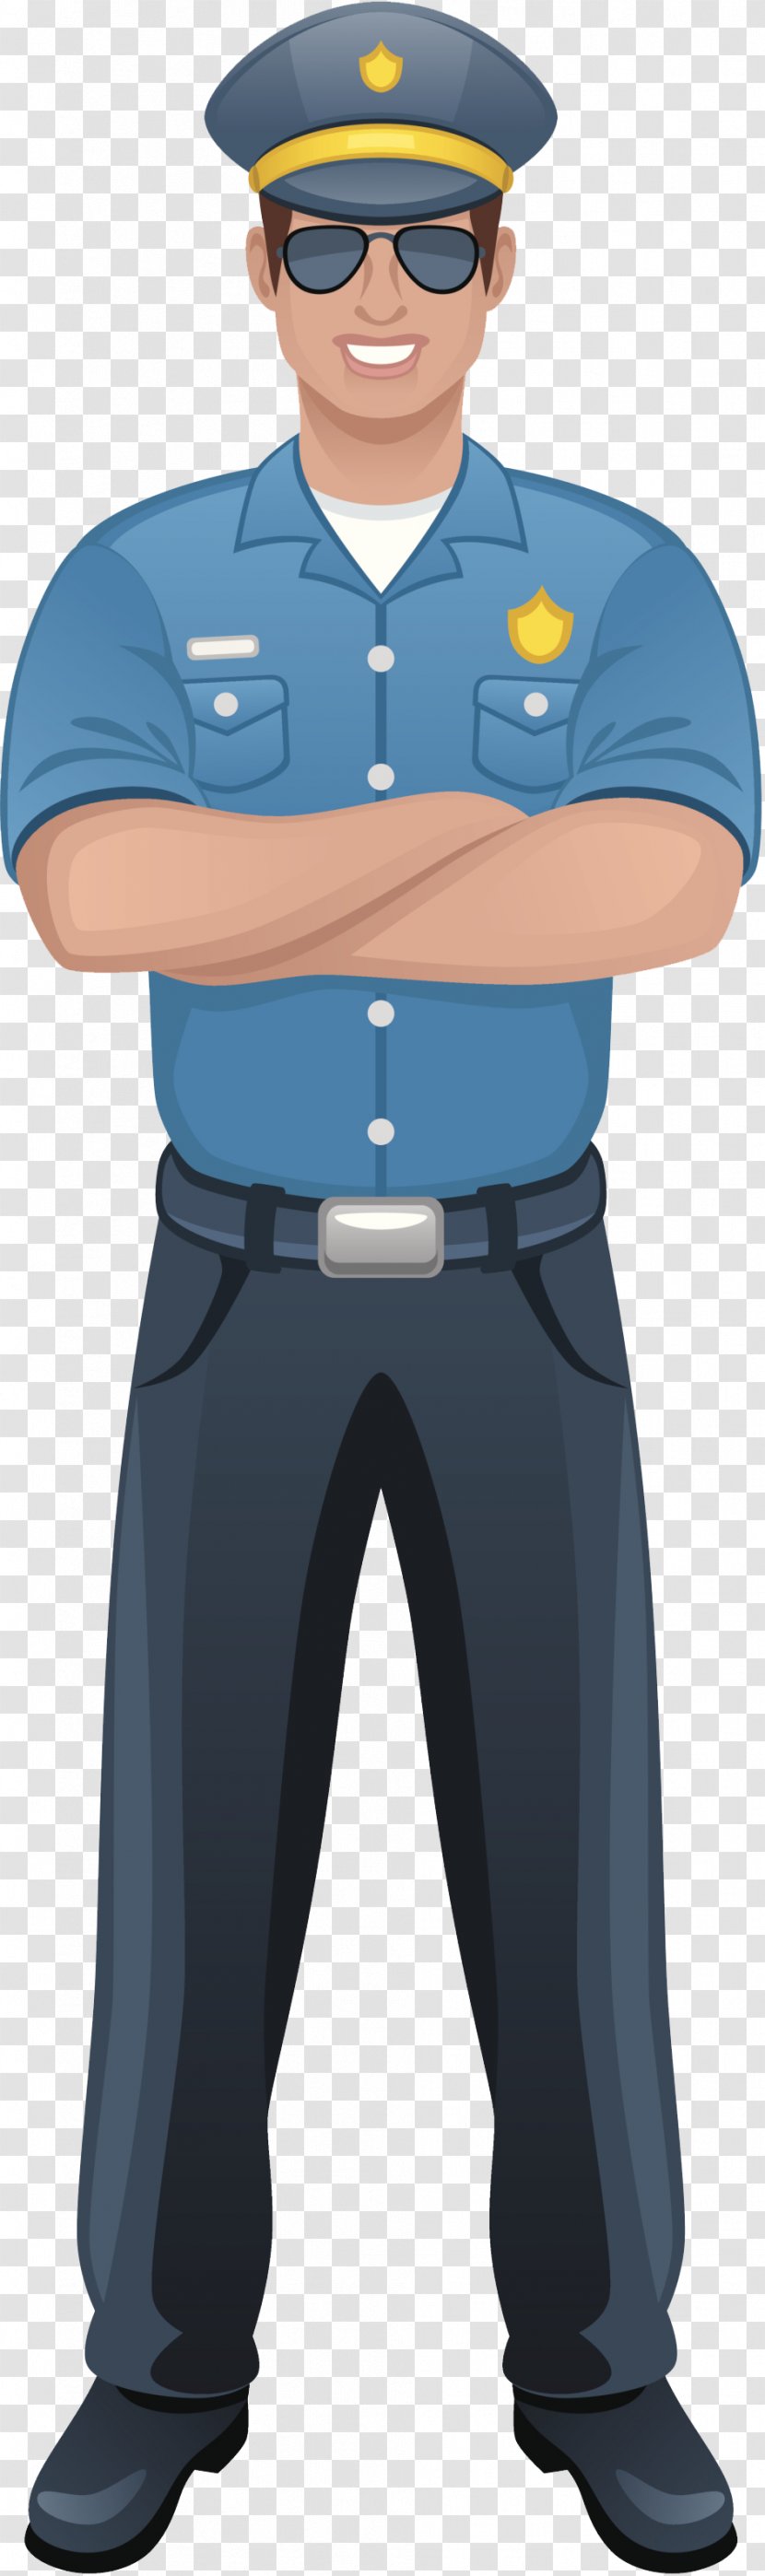 Police Officer Free Content Clip Art - Cop Cliparts Transparent PNG